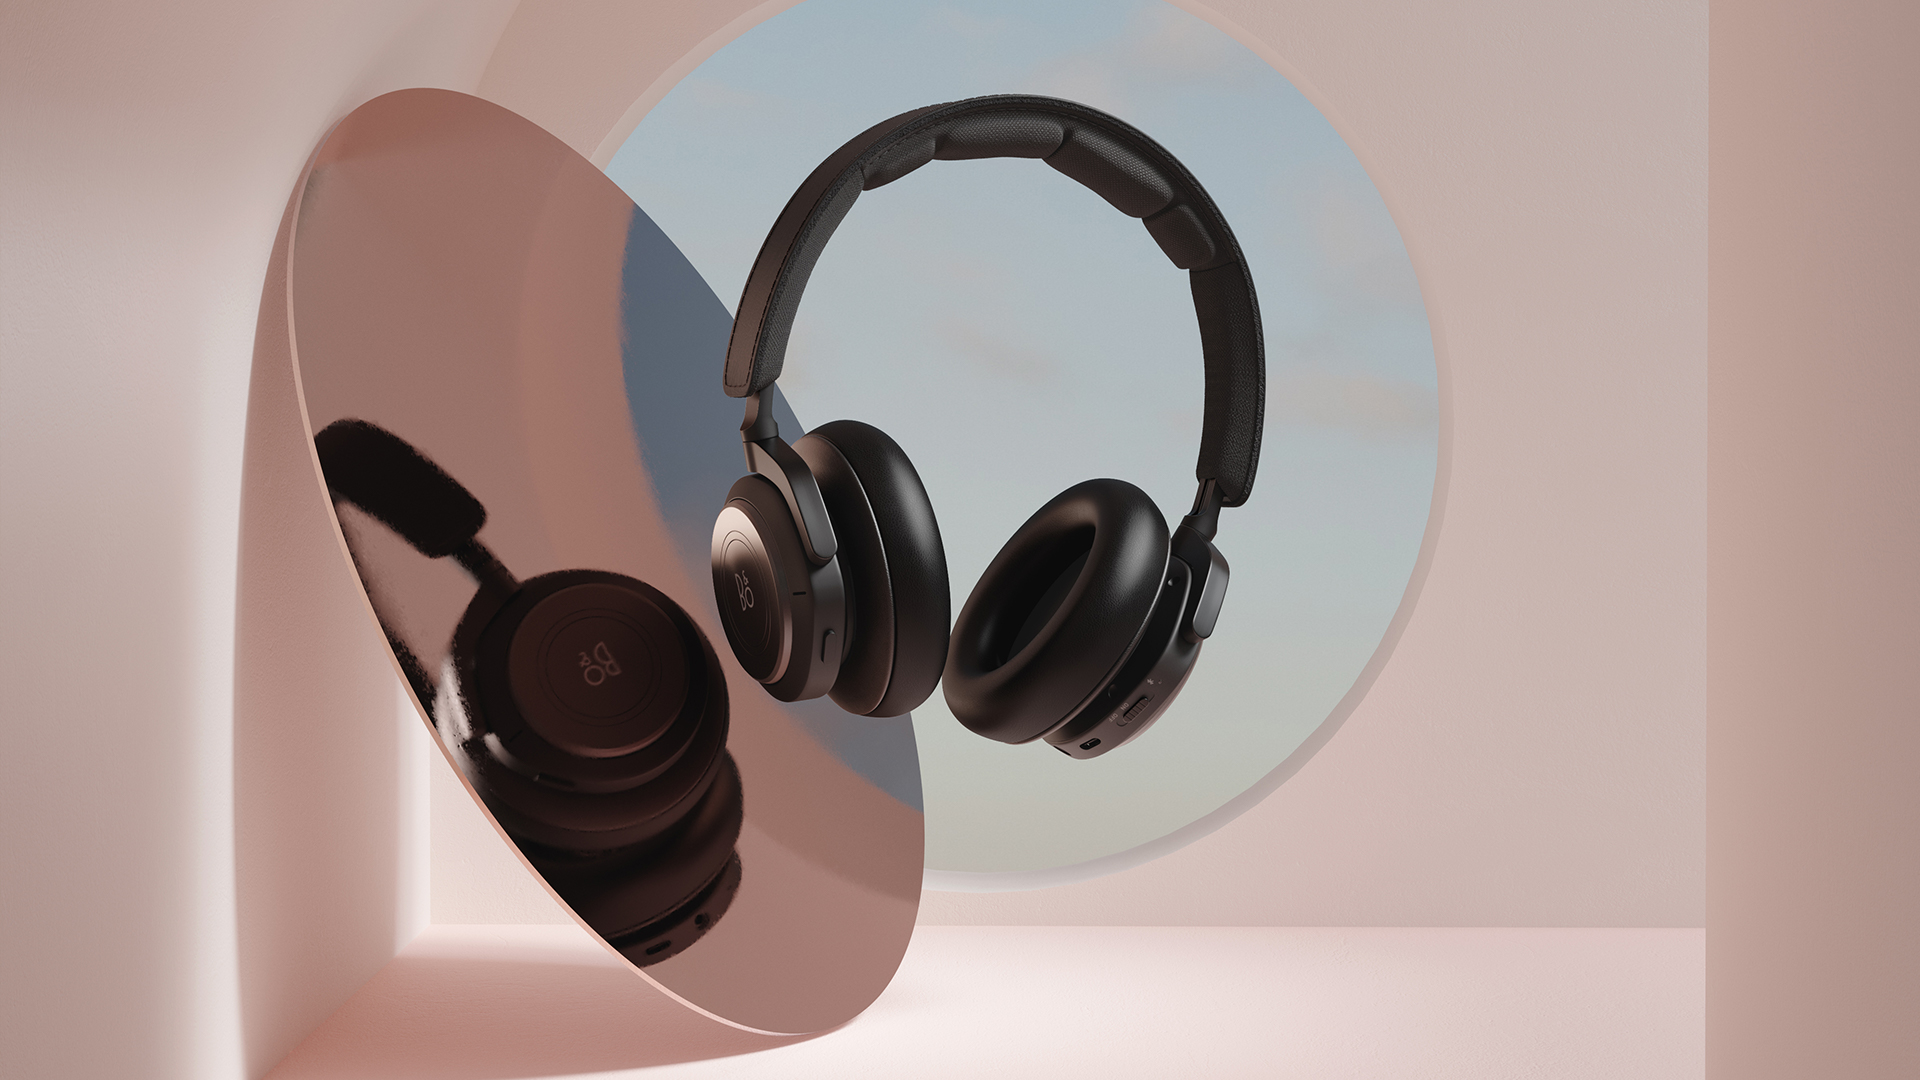 Bang Olufsen High End Headphones Speakers And Televisions - lazer dodge by kop roblox